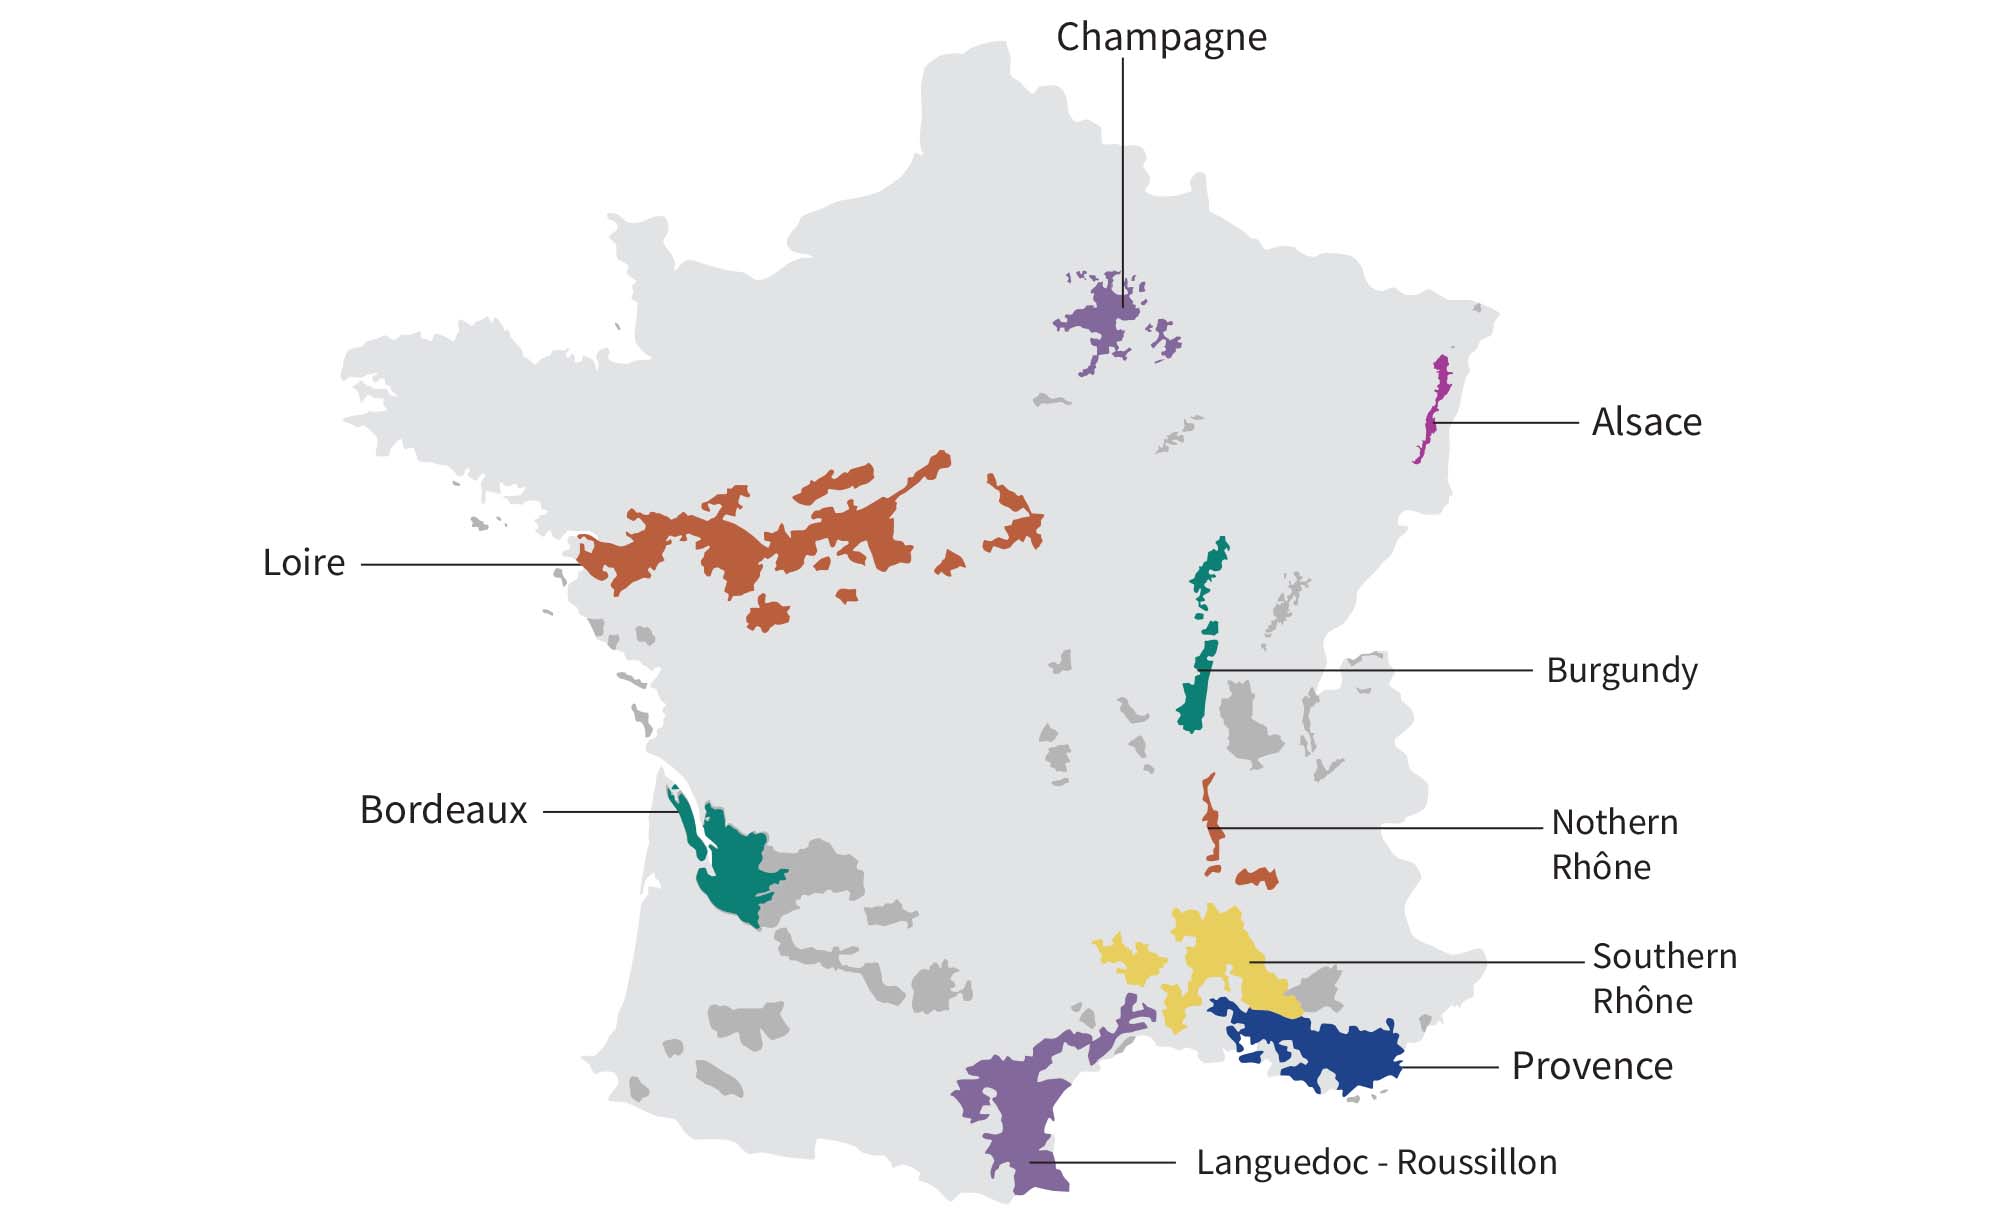 map of France highlighting key wine regions: Champagne, Alsace, Burgundy, Northern Rhône, Southern Rhône, Provence, Languedoc-Roussillon, Bordeaux and Loire